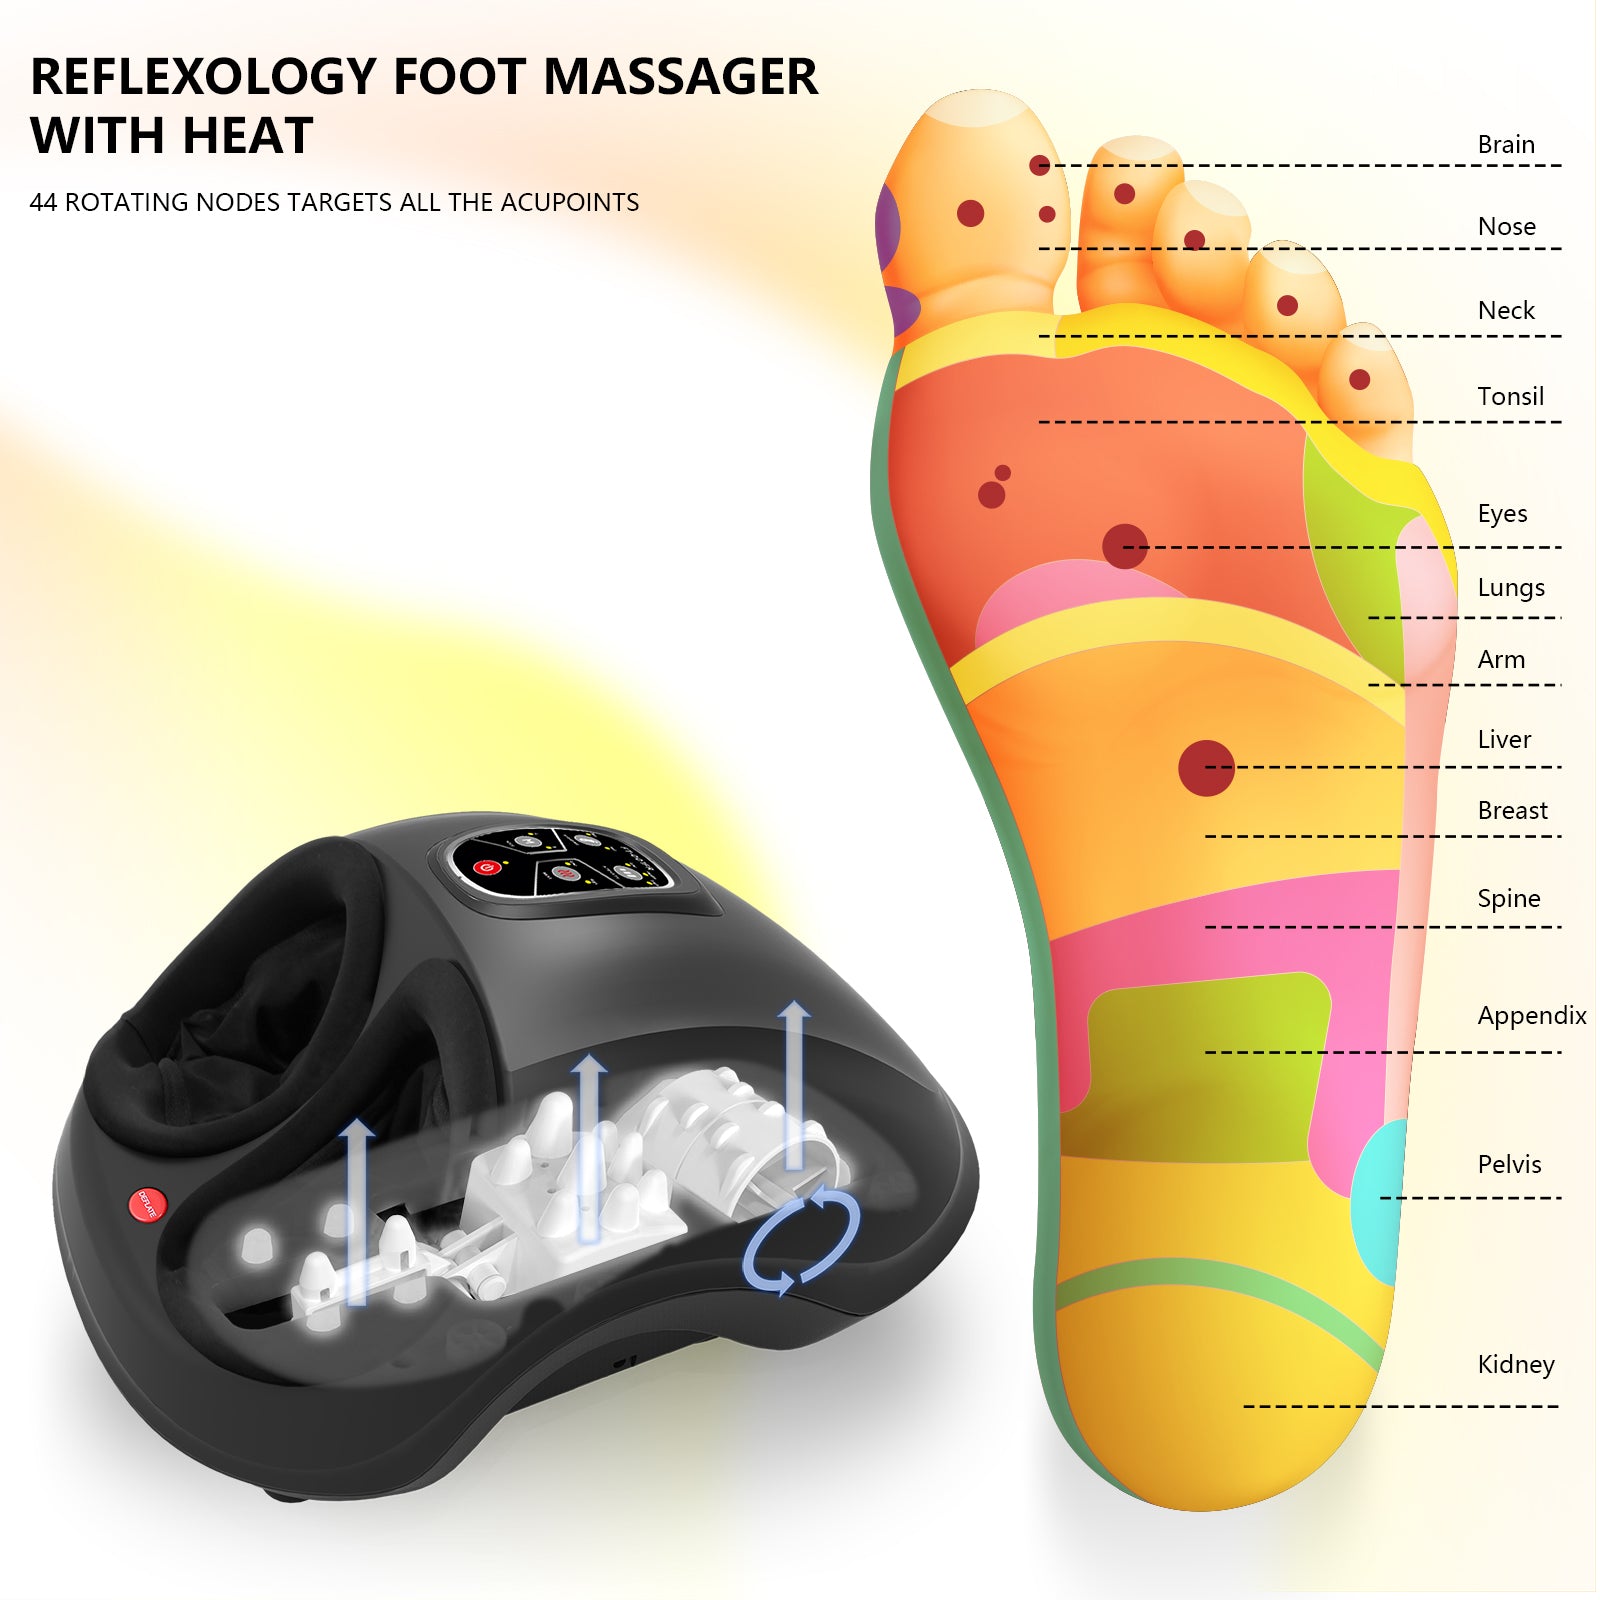 FIT KING Neck Massager with Heat,Fatigue and Pain Relief,TENS